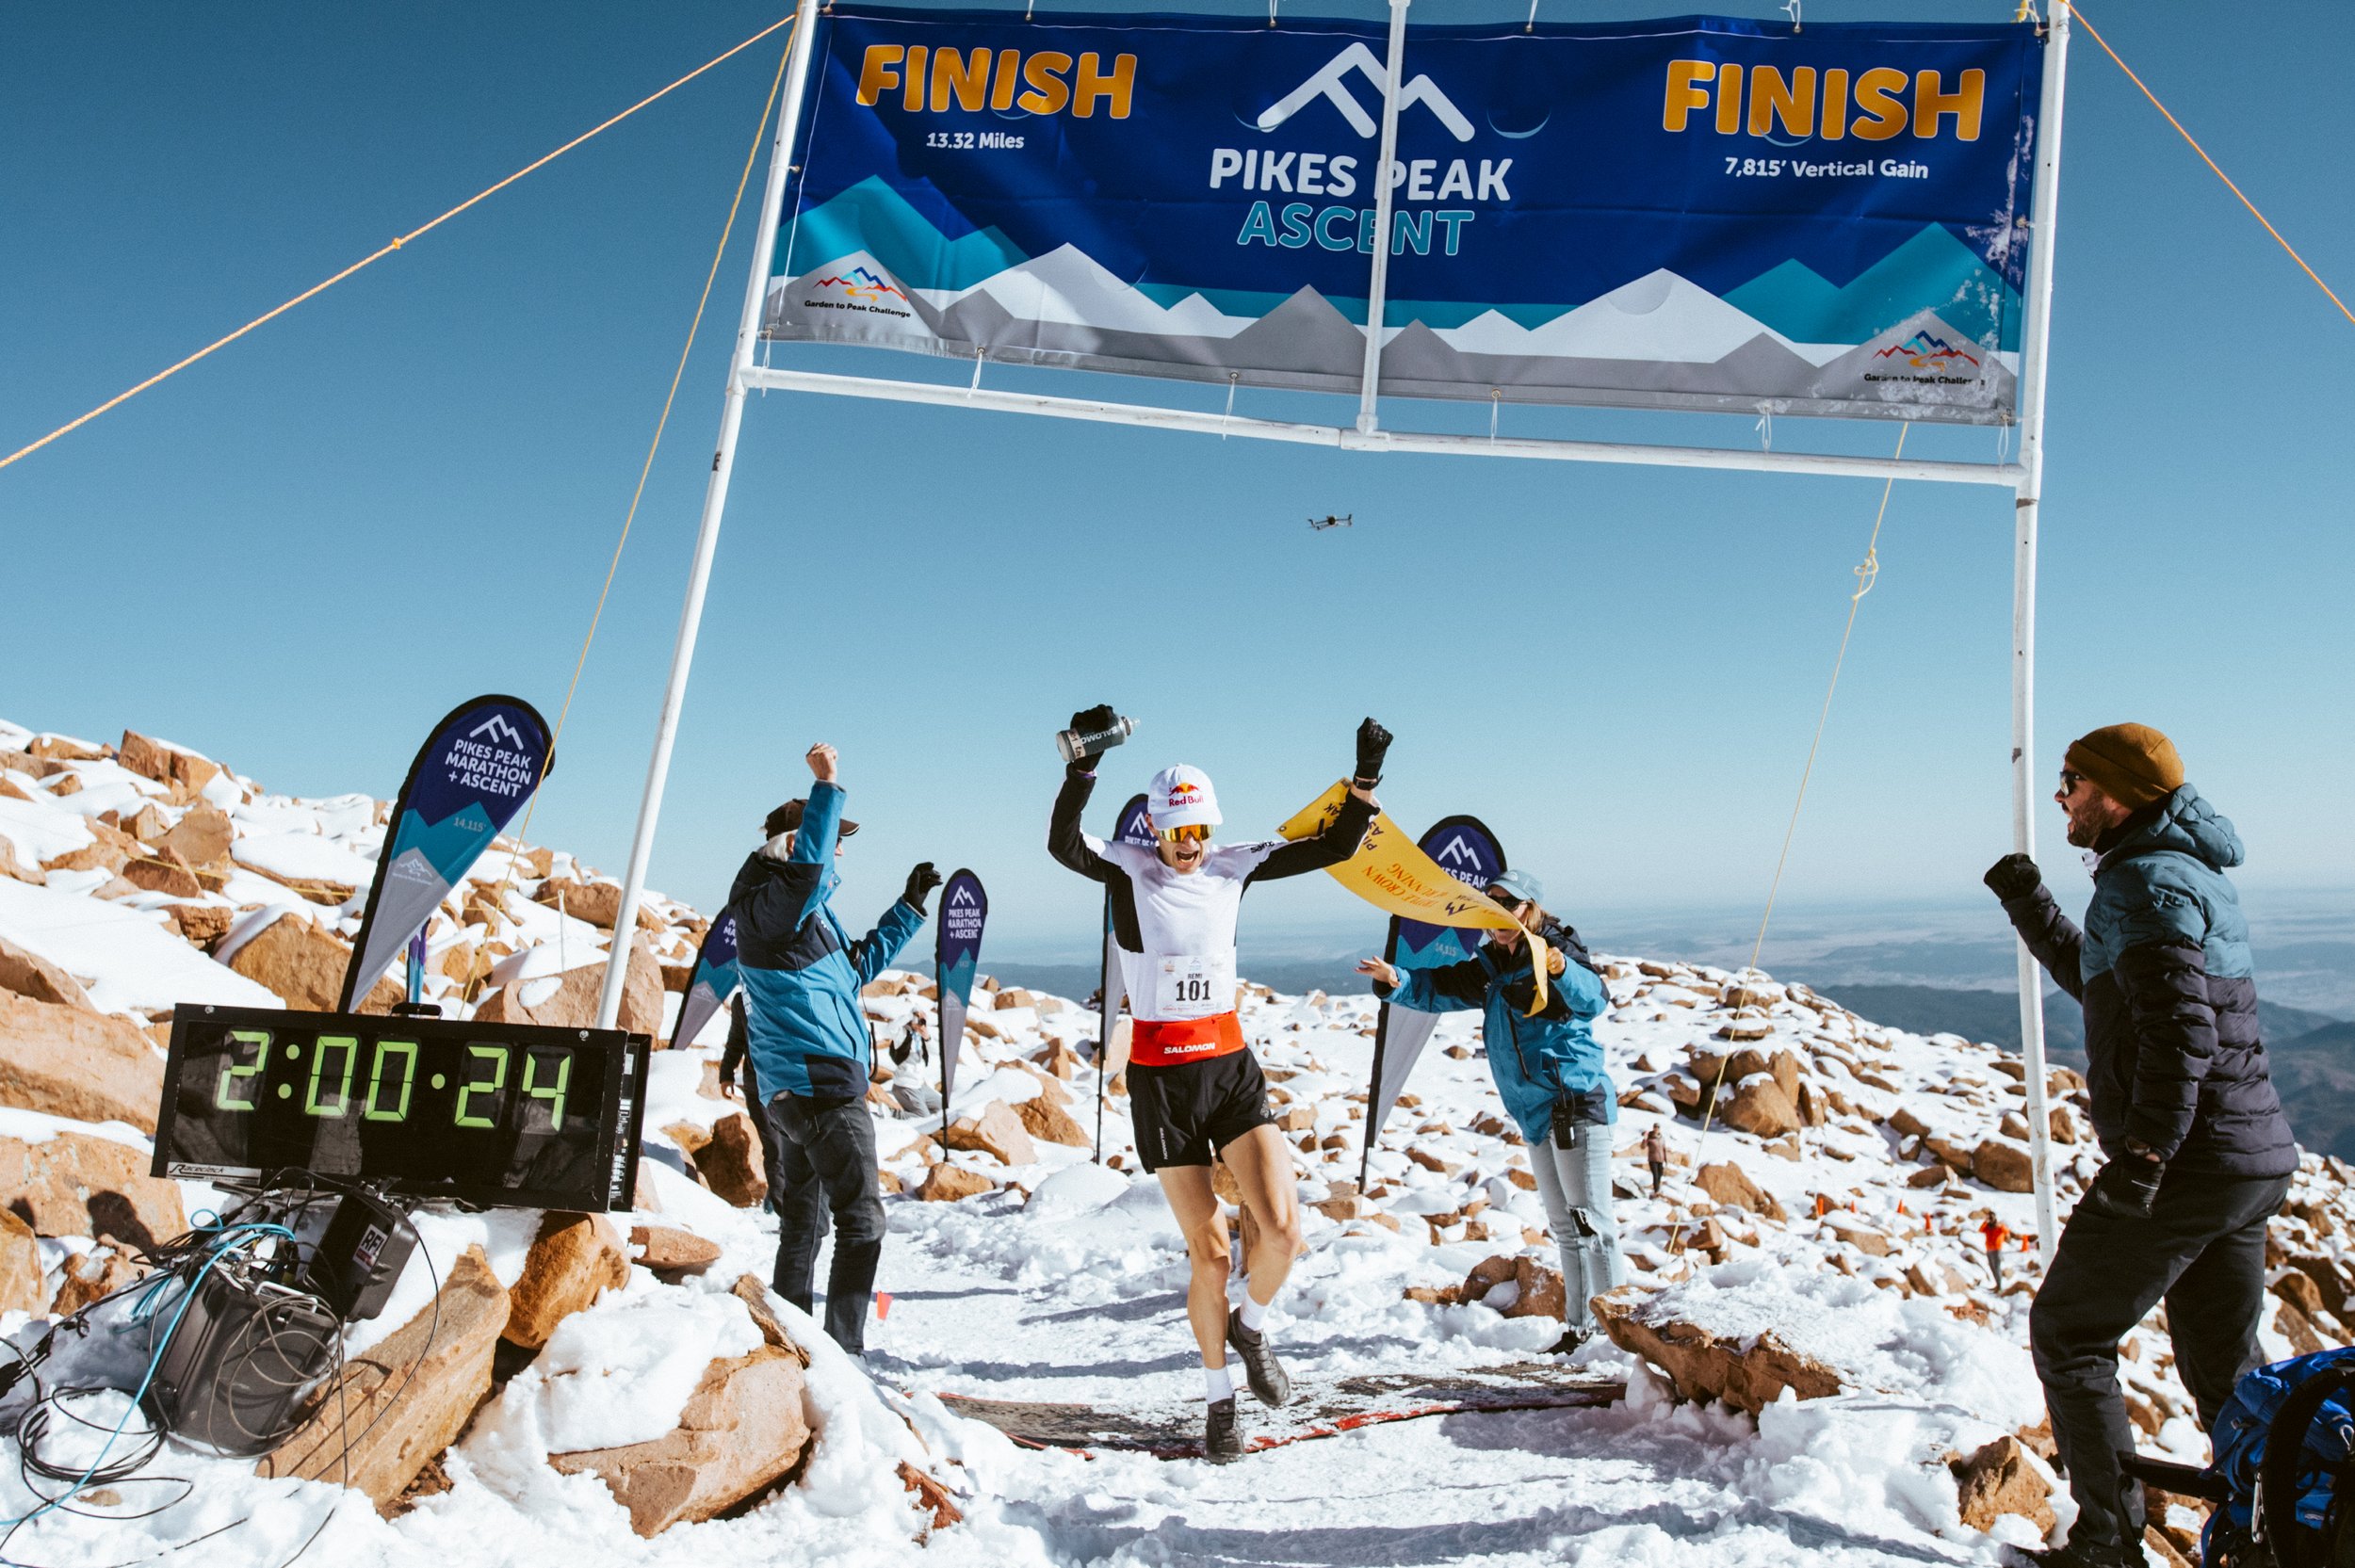  Swiss runner Rémi Bonnet cheers as he crosses the finish line, breaking the Pikes Peak Ascent record of 2:01:06 set in 1993 with a time of 2:00:20 on Saturday, Sept. 16, 2023 in Colorado Springs, Colo. Now, Bonnet said he has his sights set on runni